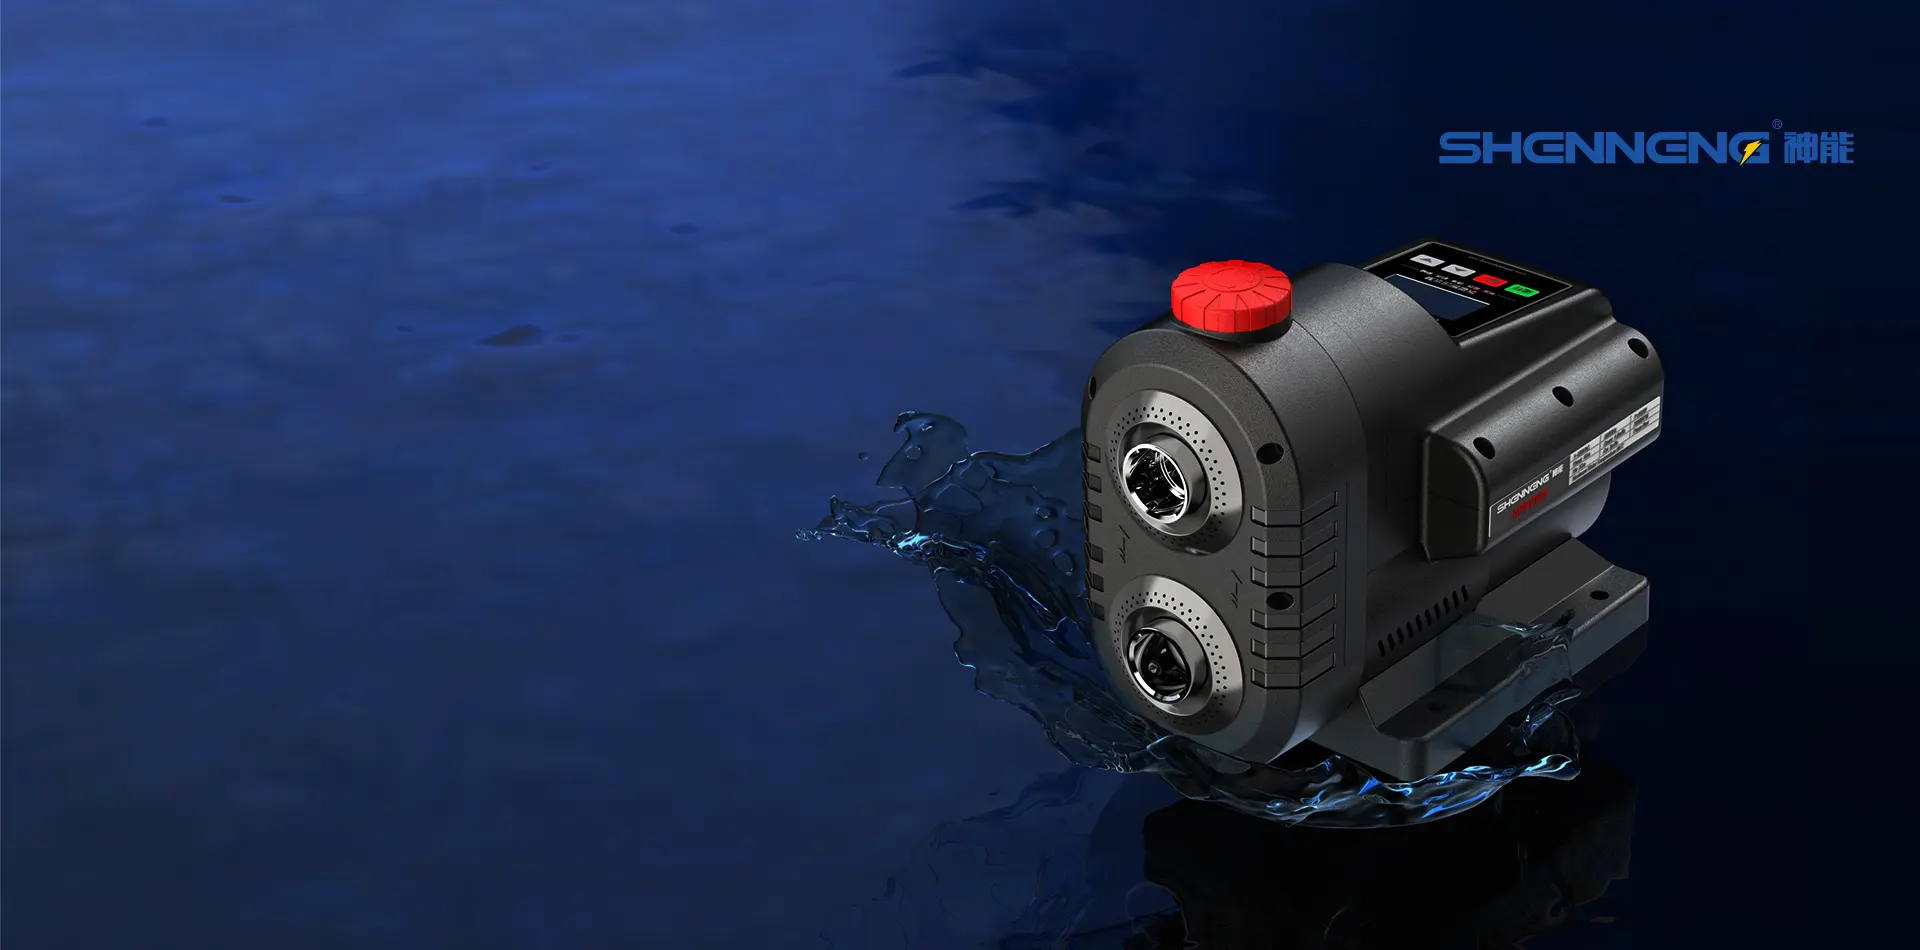 Variable Frequency pumps